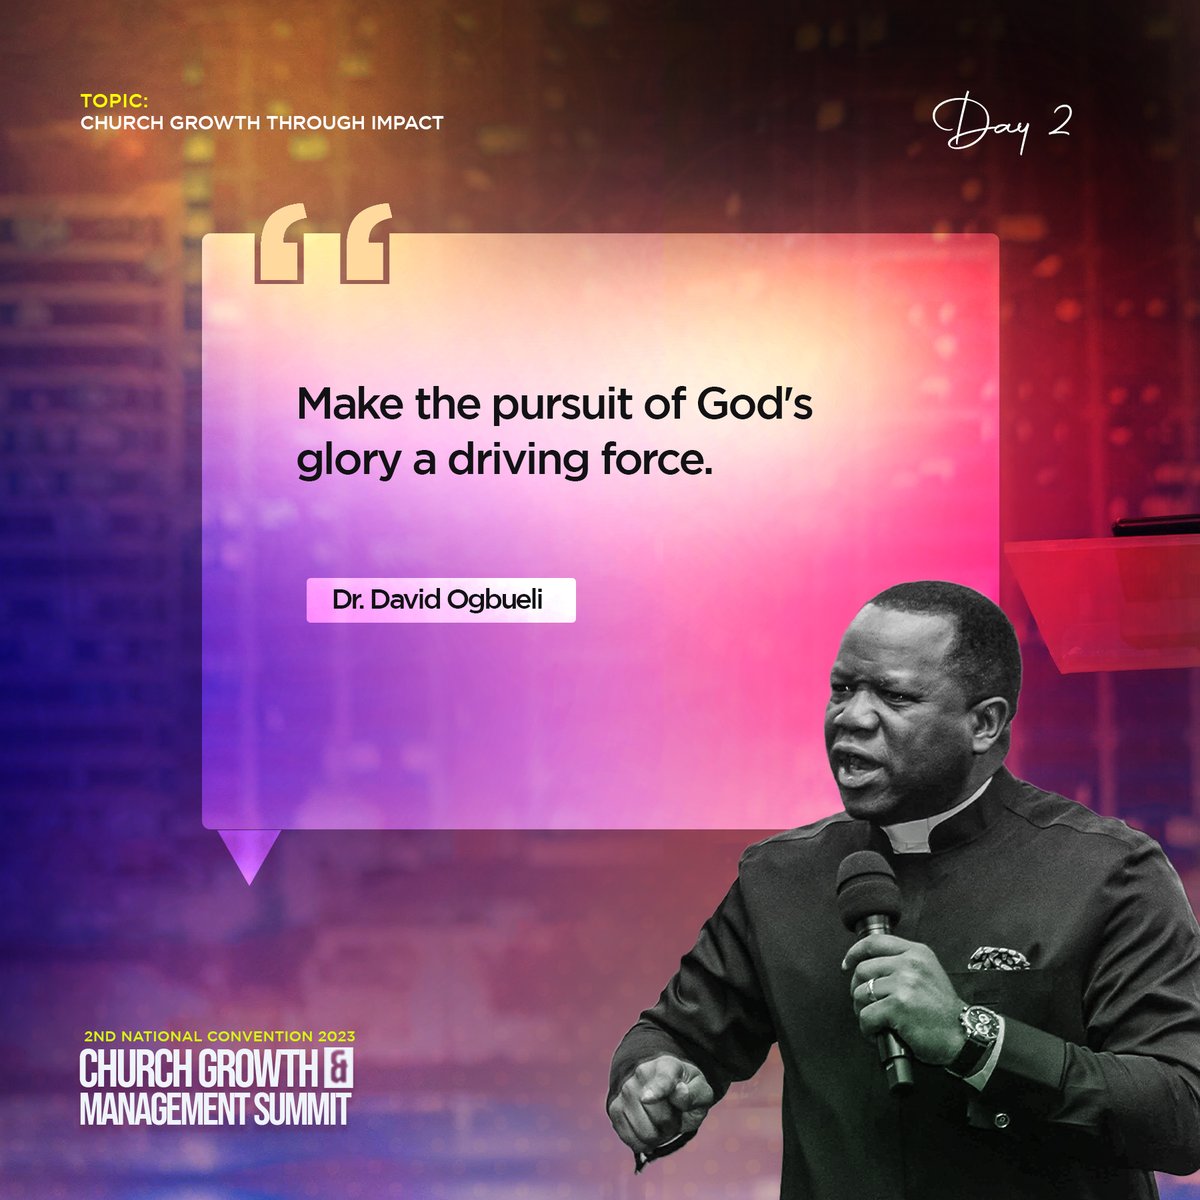 Nuggets from the ongoing Church Growth and Management summit.

#pastordavidogbueli
#dominioncity
#globalmissionnetwork
#globalmission
#managementsummit